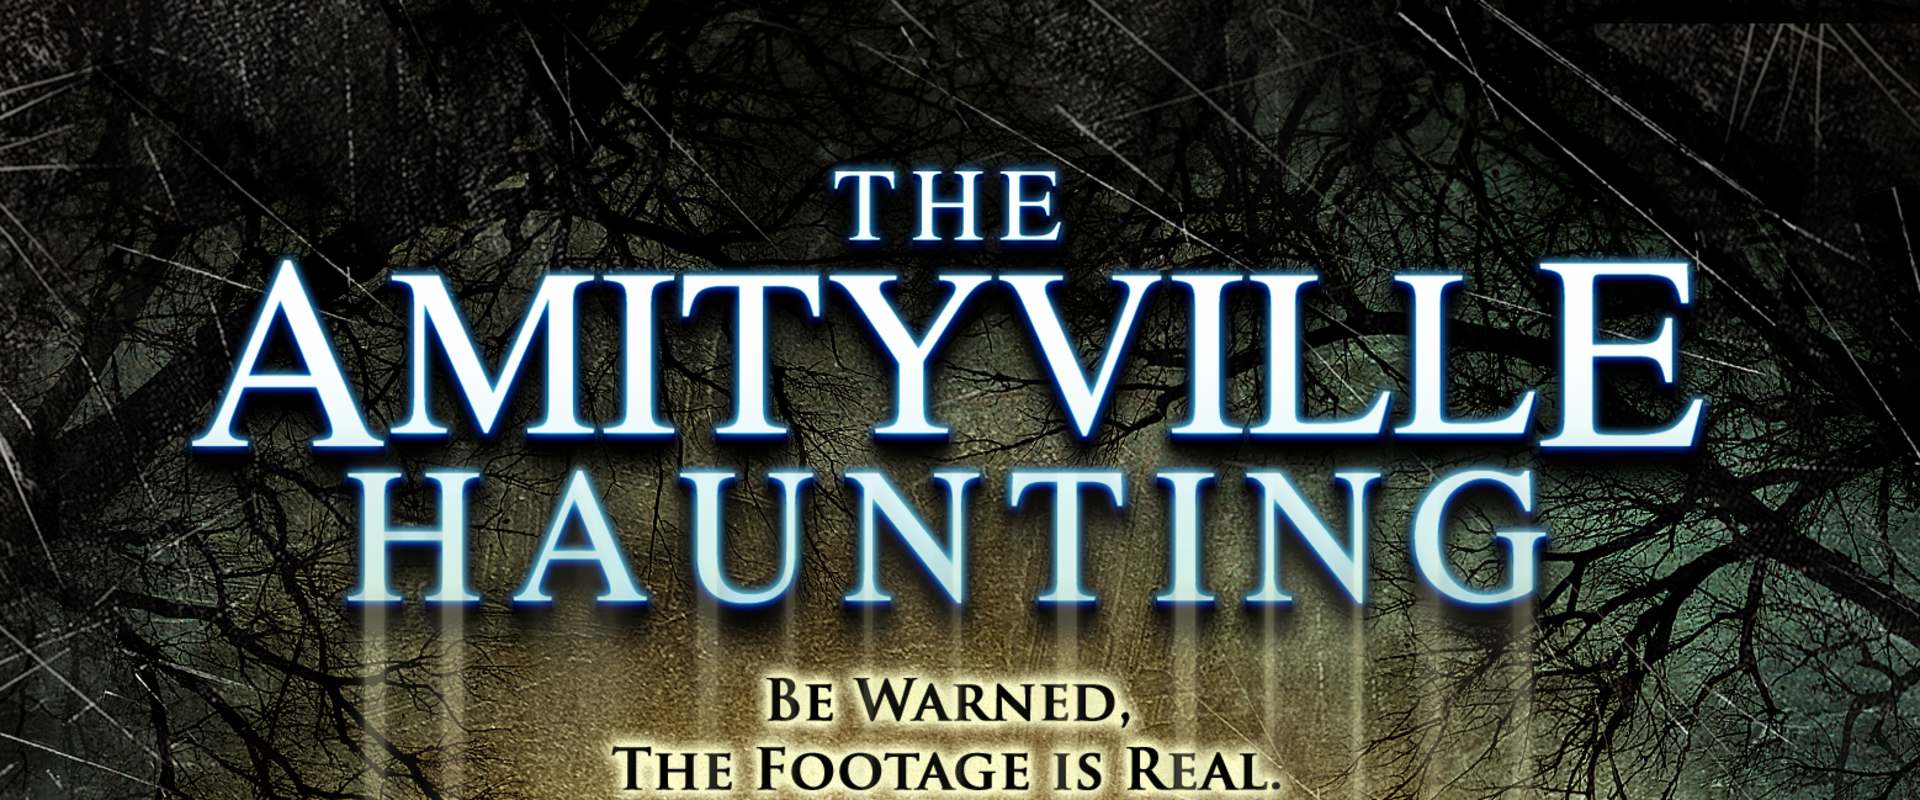 The Amityville Haunting background 1